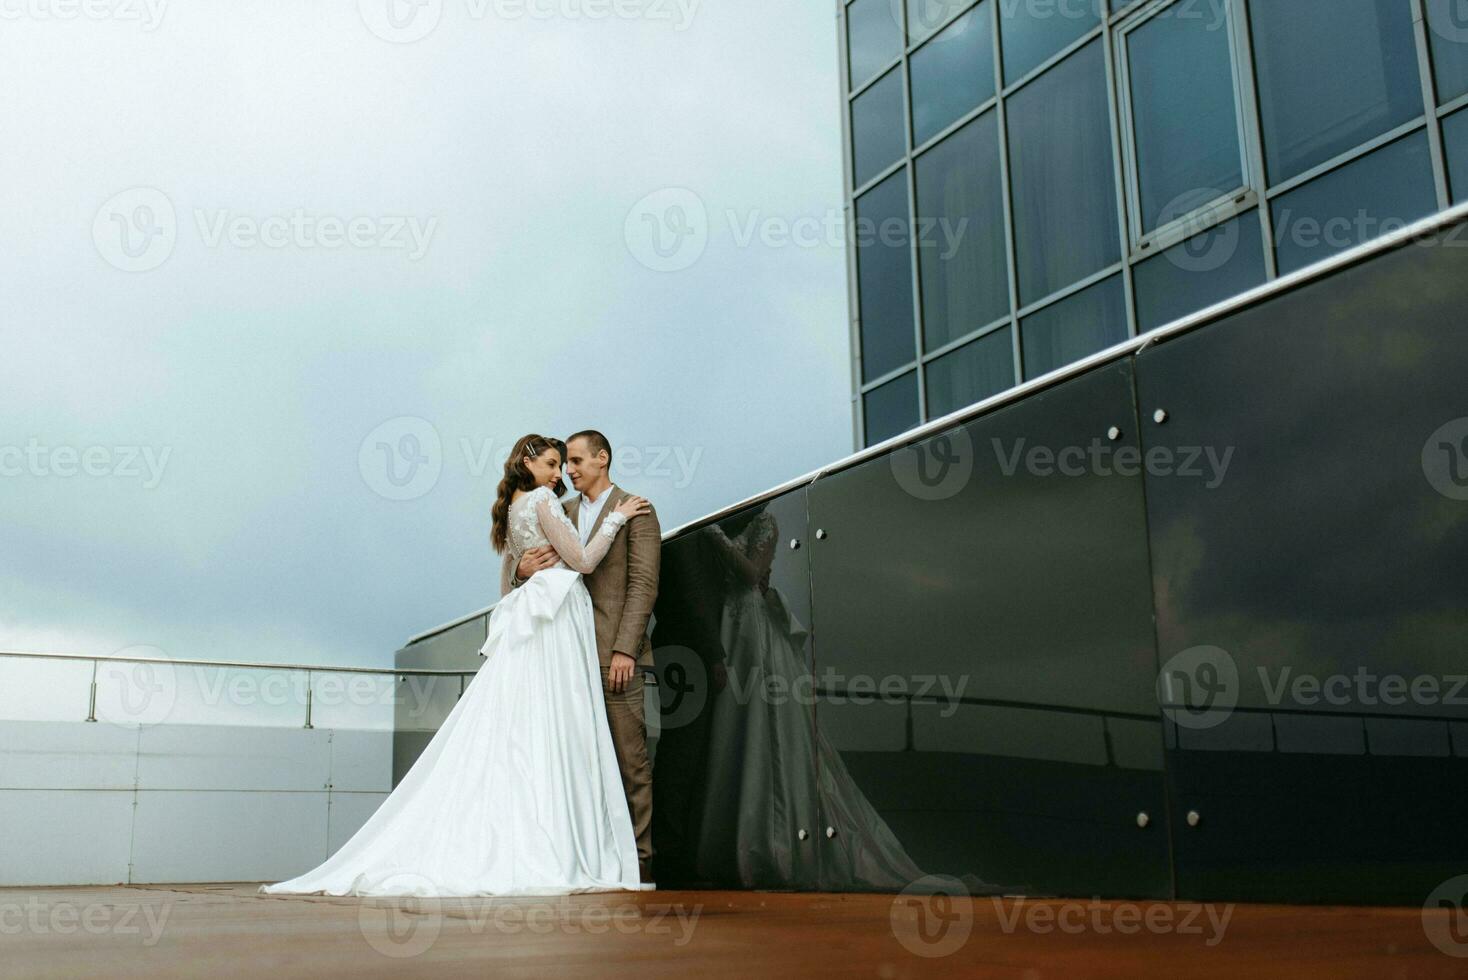 bride and groom first meeting on the roof of skyscraper photo